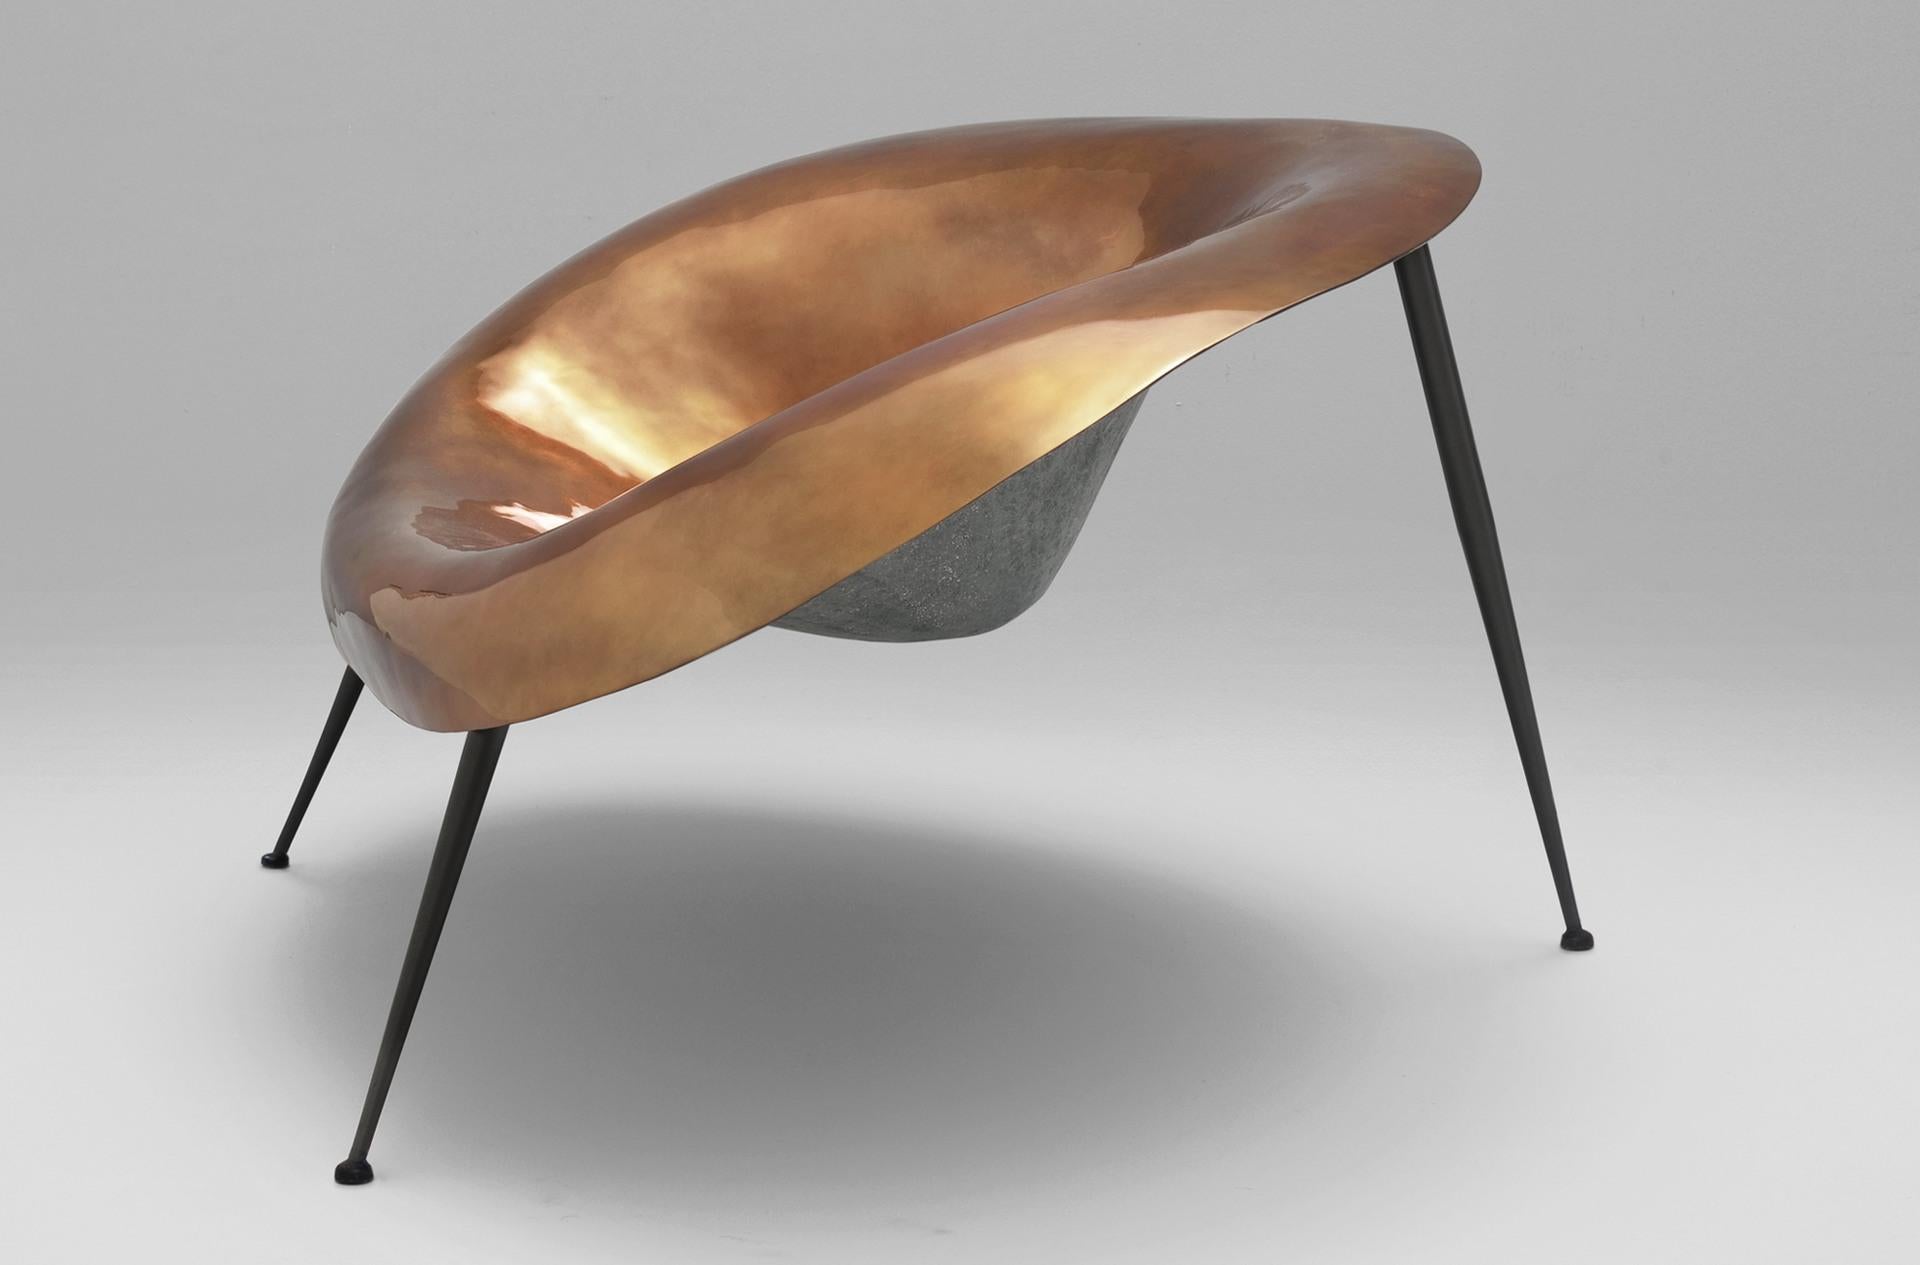 Copper Nido by Imperfettolab
2008
Dimensions: W 130 x D 97 x H 66 cm
Materials: Varnished fibreglass, metal base
Copper finish

Imperfetto lab
Who we are? We are a family.
Verter Turroni, Emanuela Ravelli and our children Elia, Margherita and